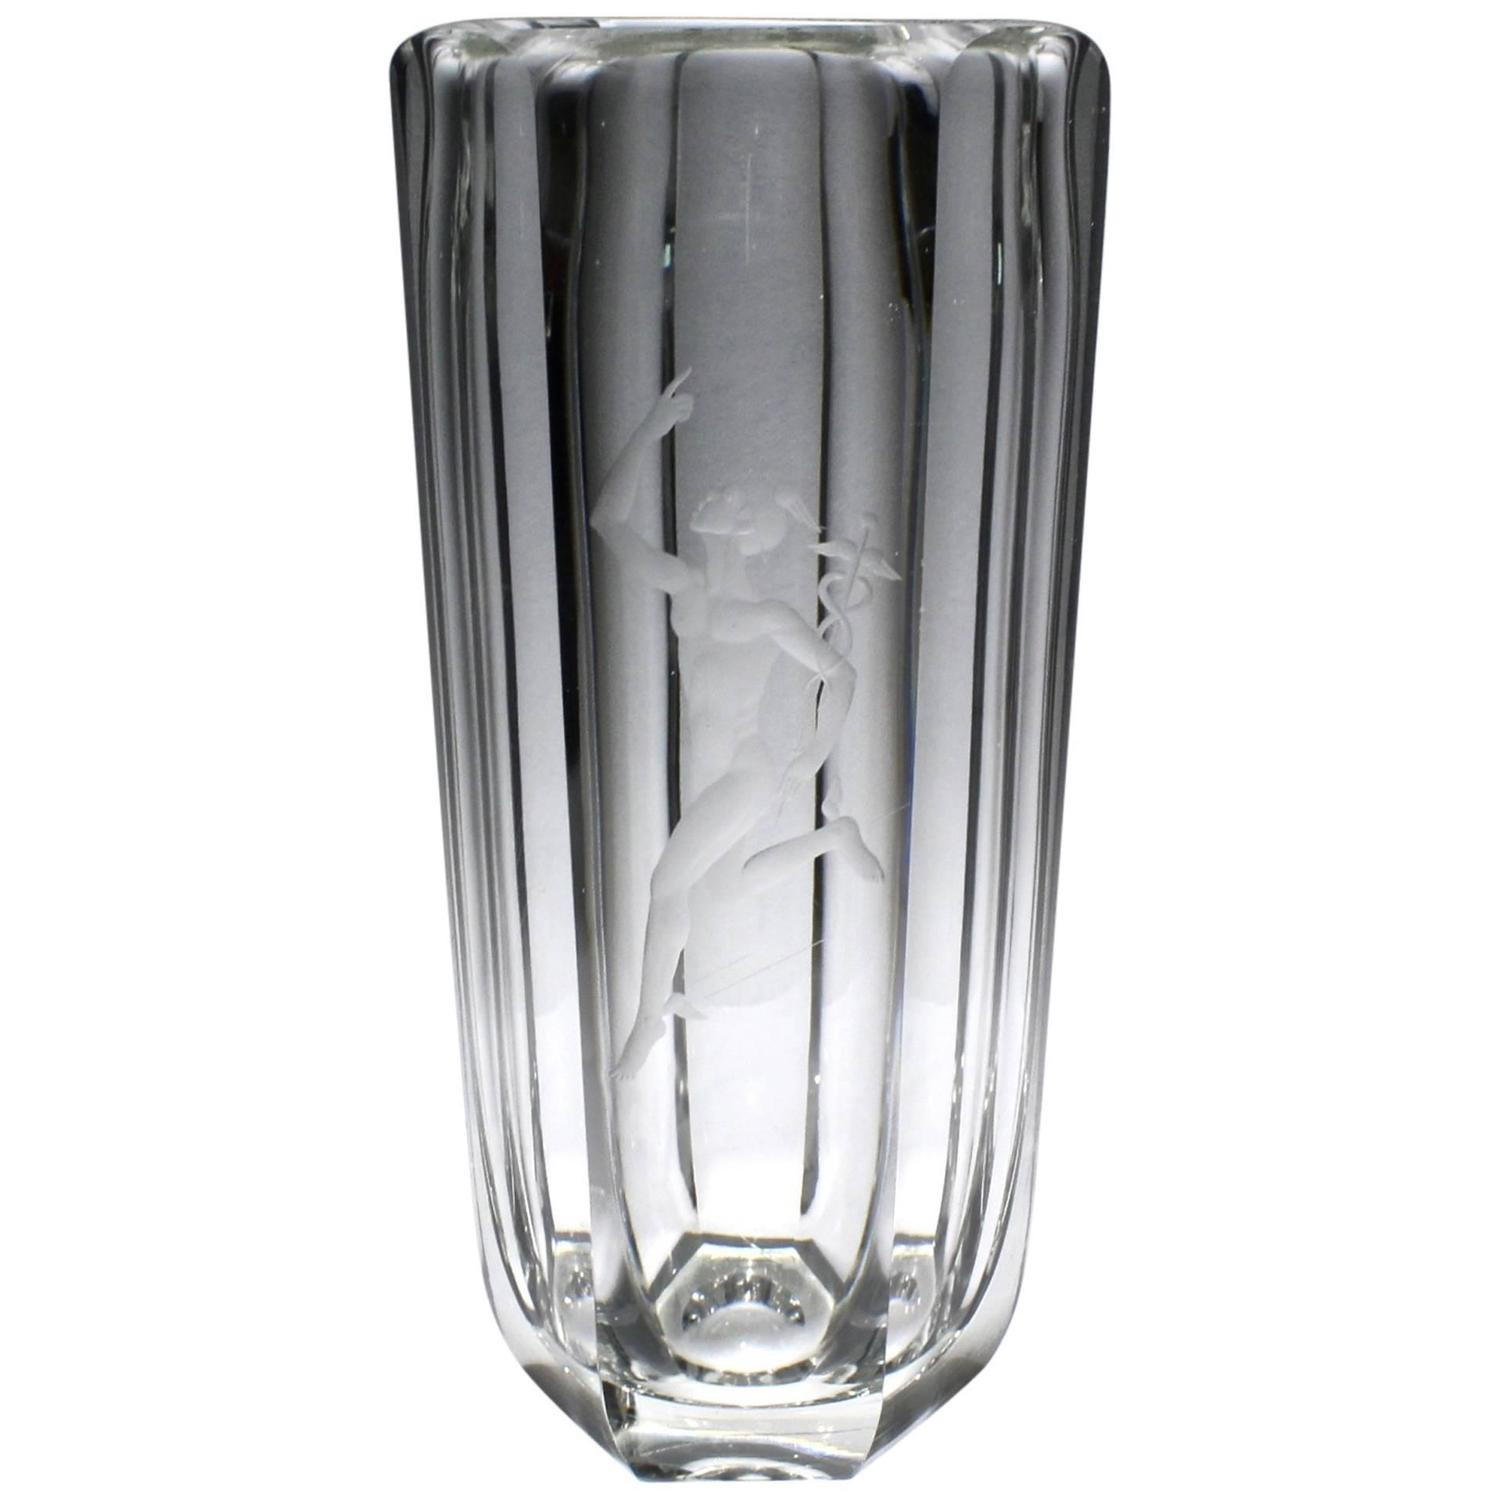 29 Lovely Kosta Boda Crystal Vase 2024 free download kosta boda crystal vase of kosta boda the clear sticker now used today with a san serif in large faceted art deco vase with engraved mercury by elis bergh for kosta boda